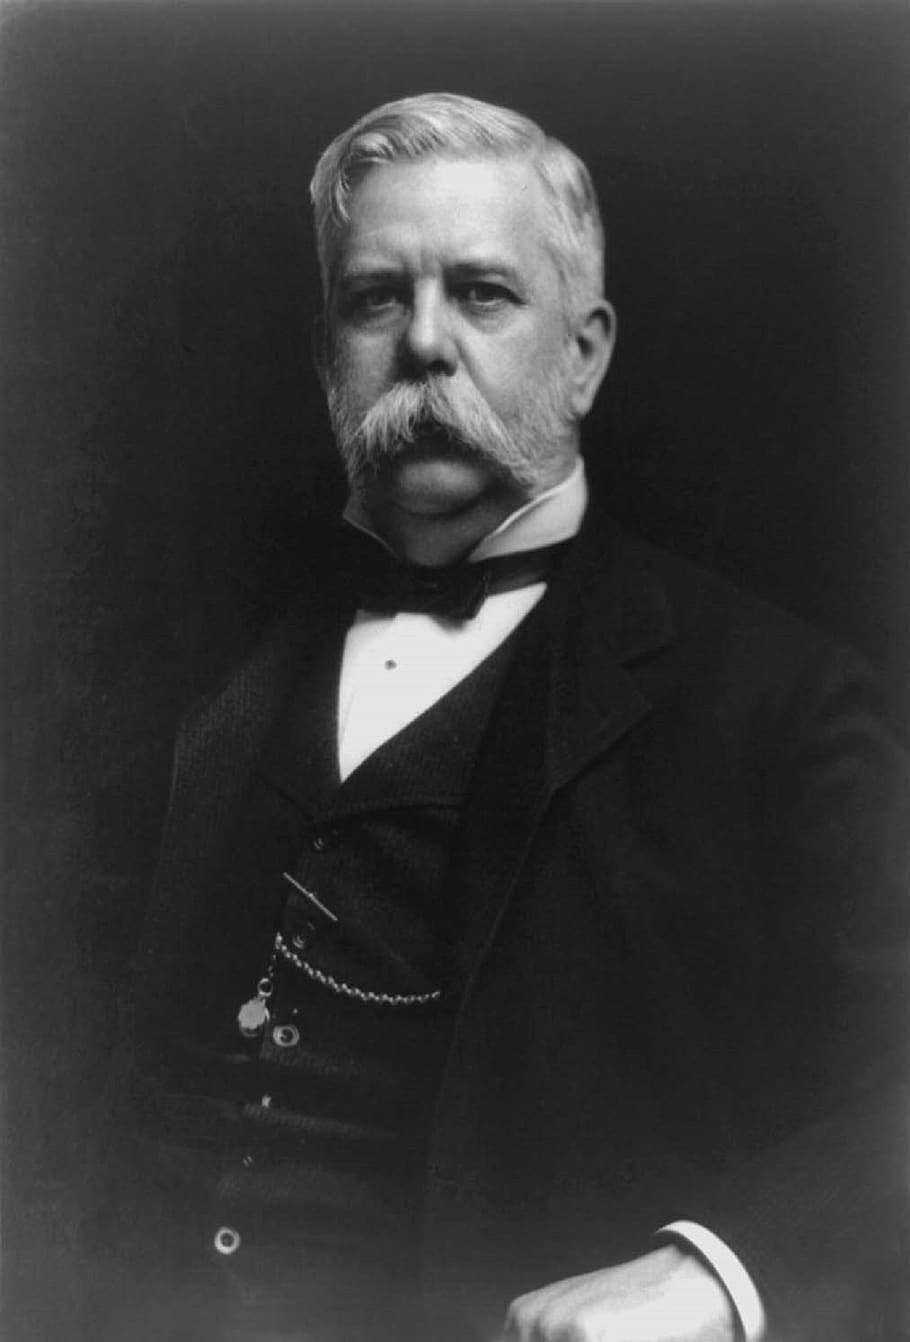 george westinghouse, entrepreneur, engineer, inventor, railway air brake, alternating current, rival to thomas edison, direct current, one person, portrait